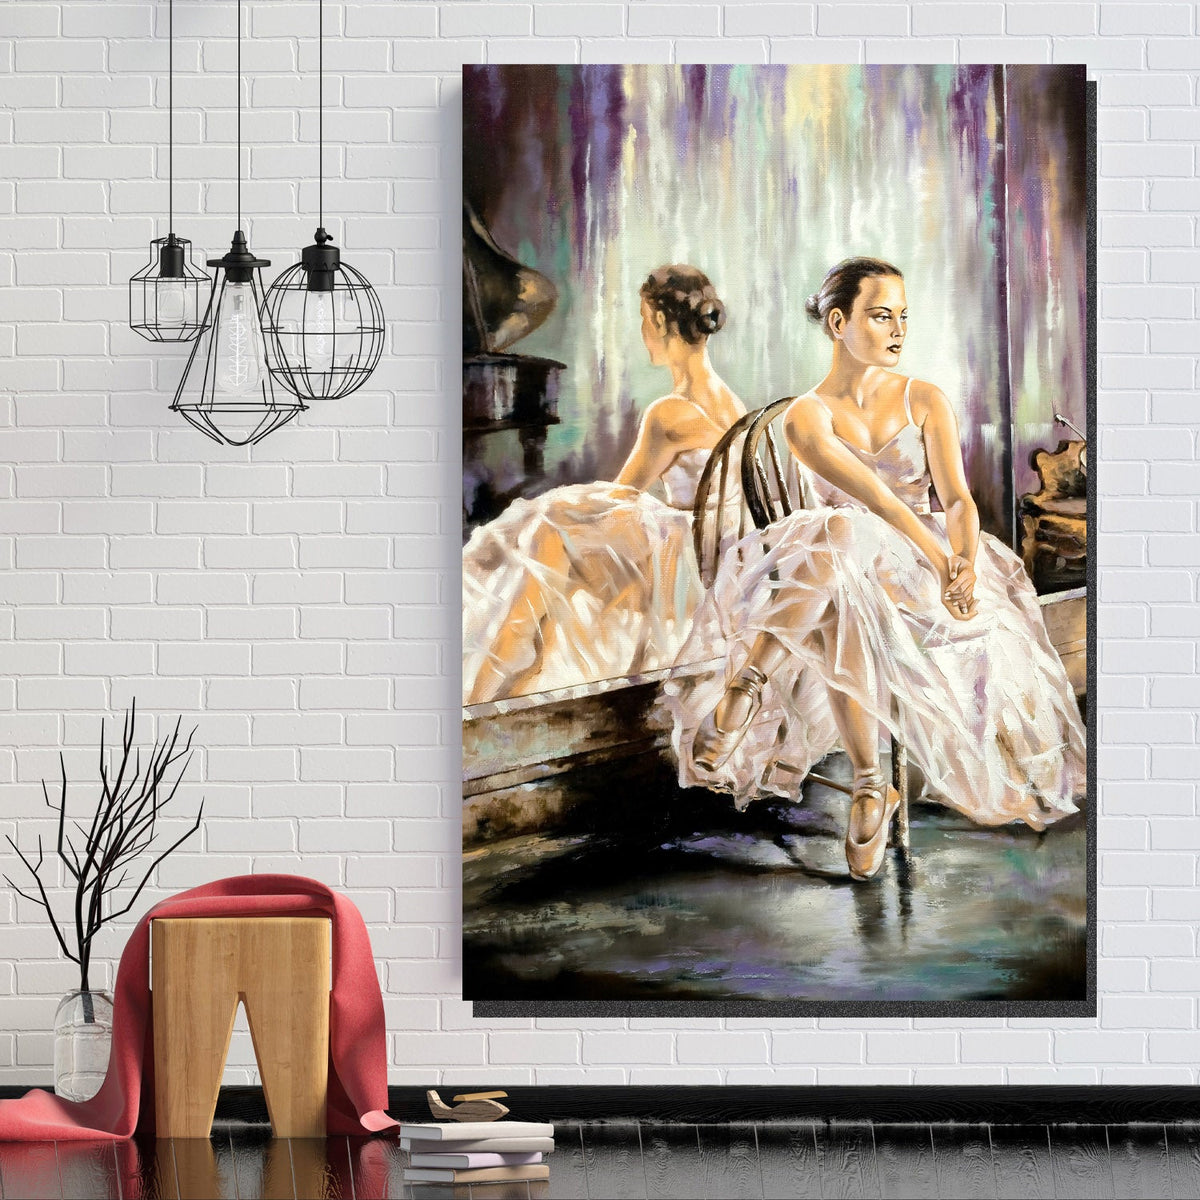 https://cdn.shopify.com/s/files/1/0387/9986/8044/products/PortraitofABallerinaCanvasArtprintStretched-2.jpg